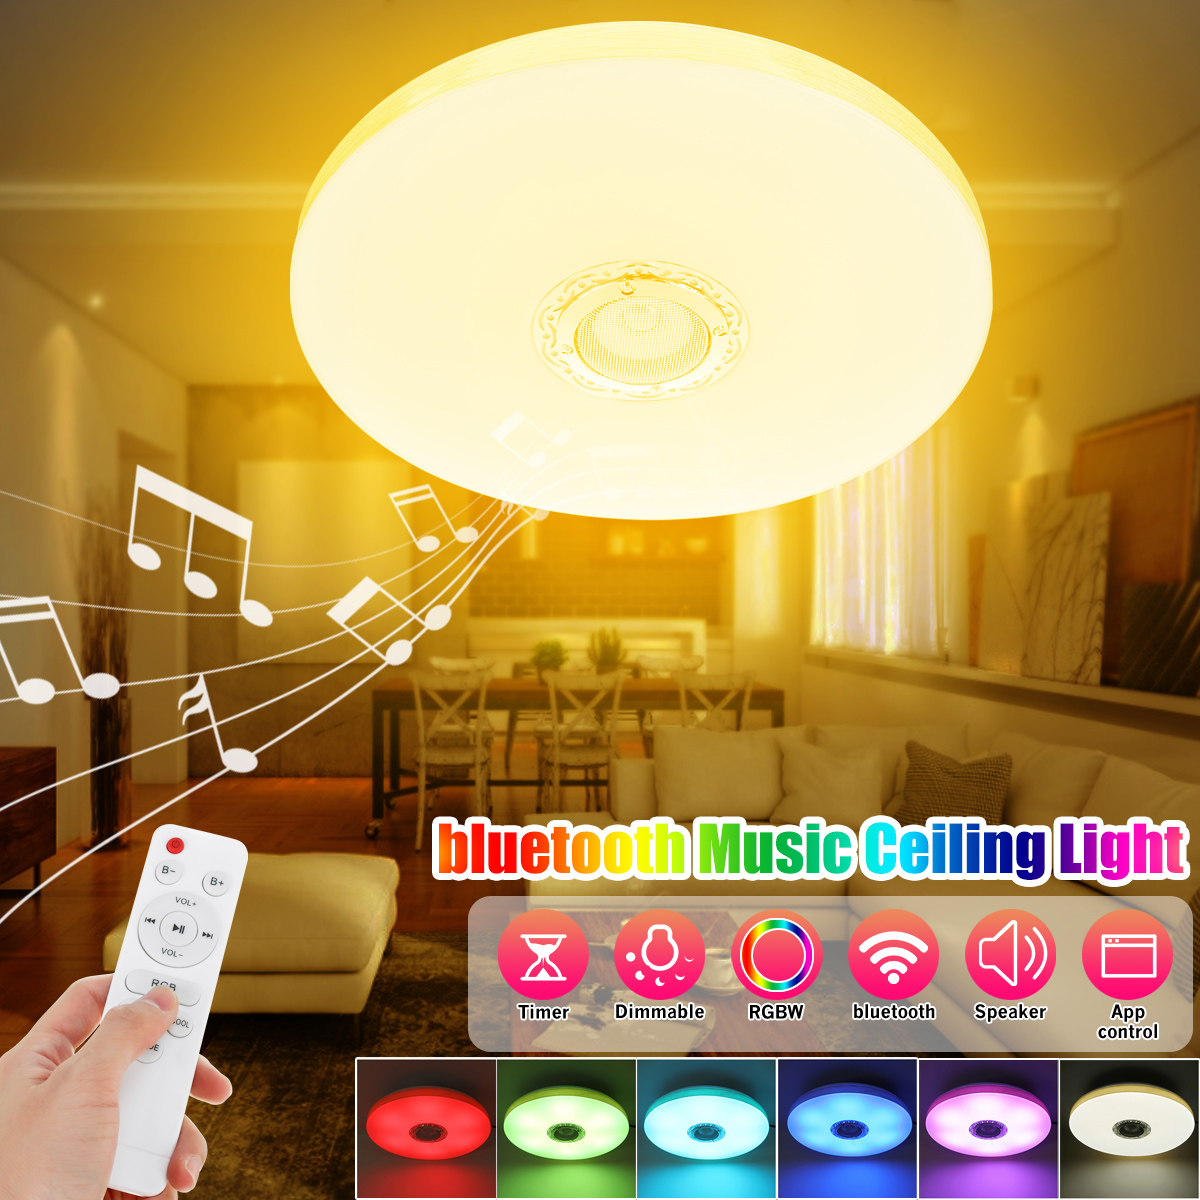 60W-Dimmable-LED-RGBW-bluetooth-Music-Speaker-Ceiling-Light-APP-Remote-Bedroom-1640924-1